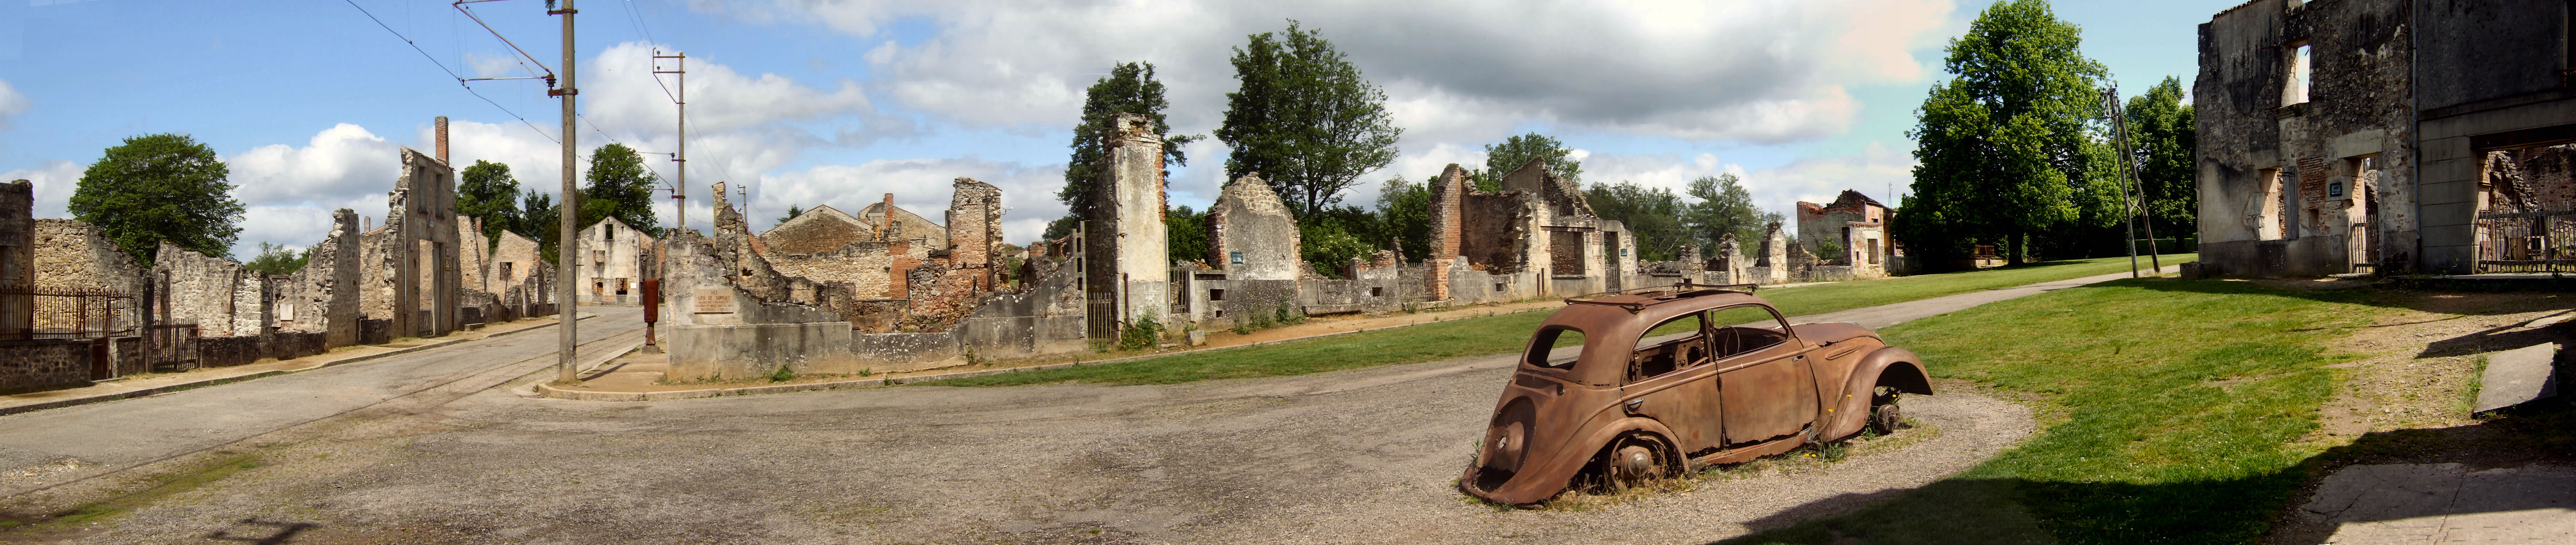 The Champ de Foire and the doctor's car at Oradour-sur-Glane looking north.